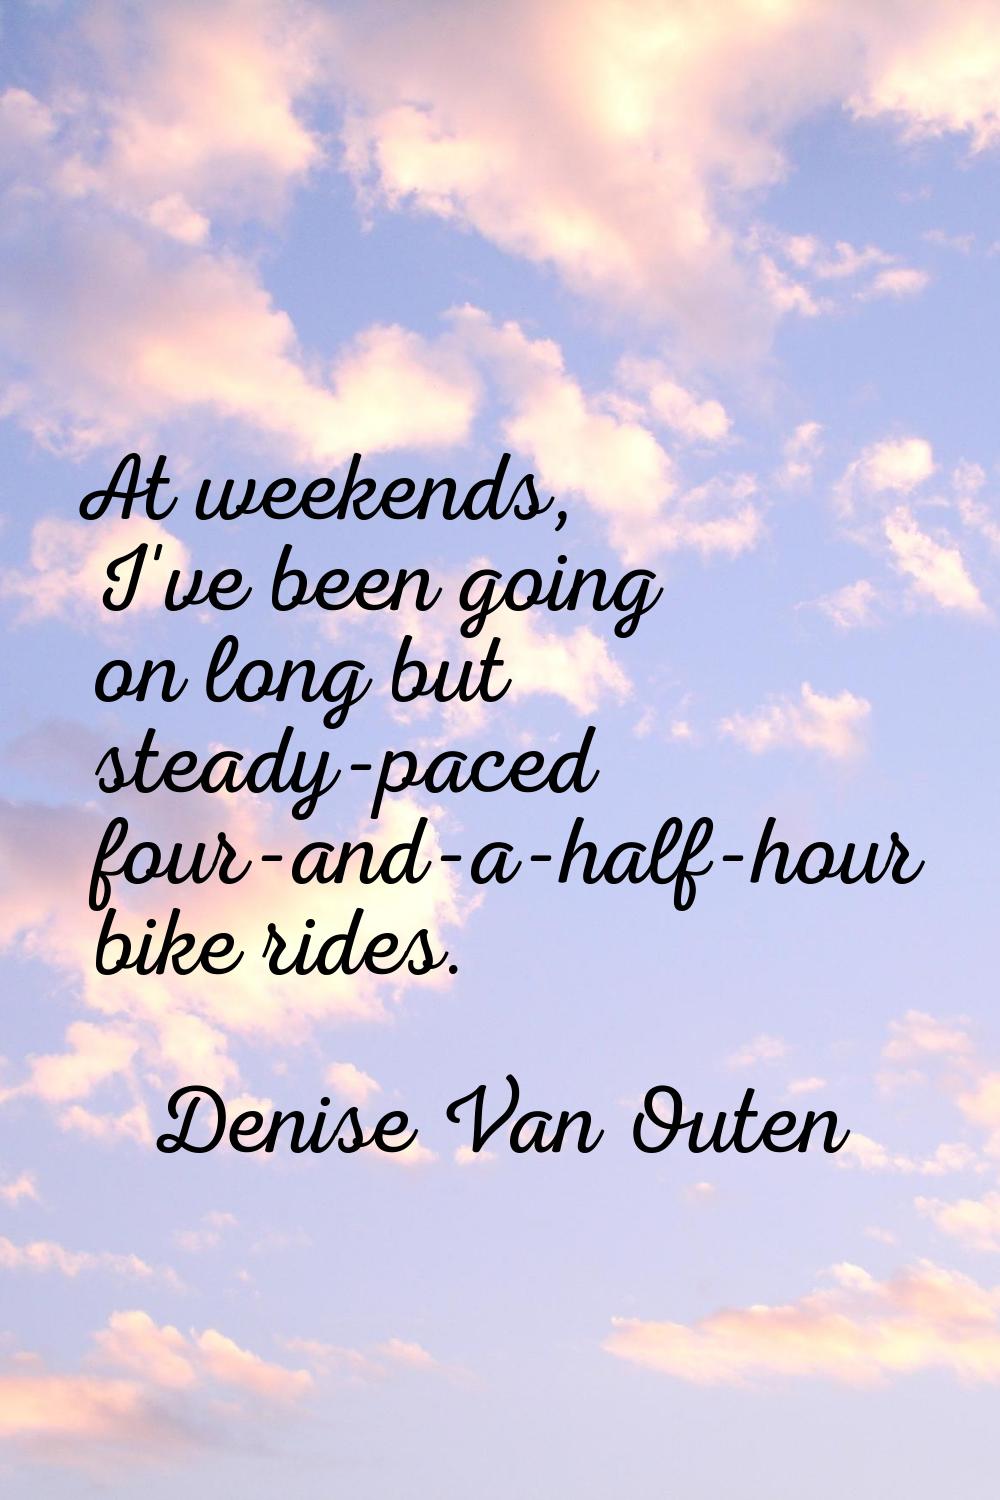 At weekends, I've been going on long but steady-paced four-and-a-half-hour bike rides.